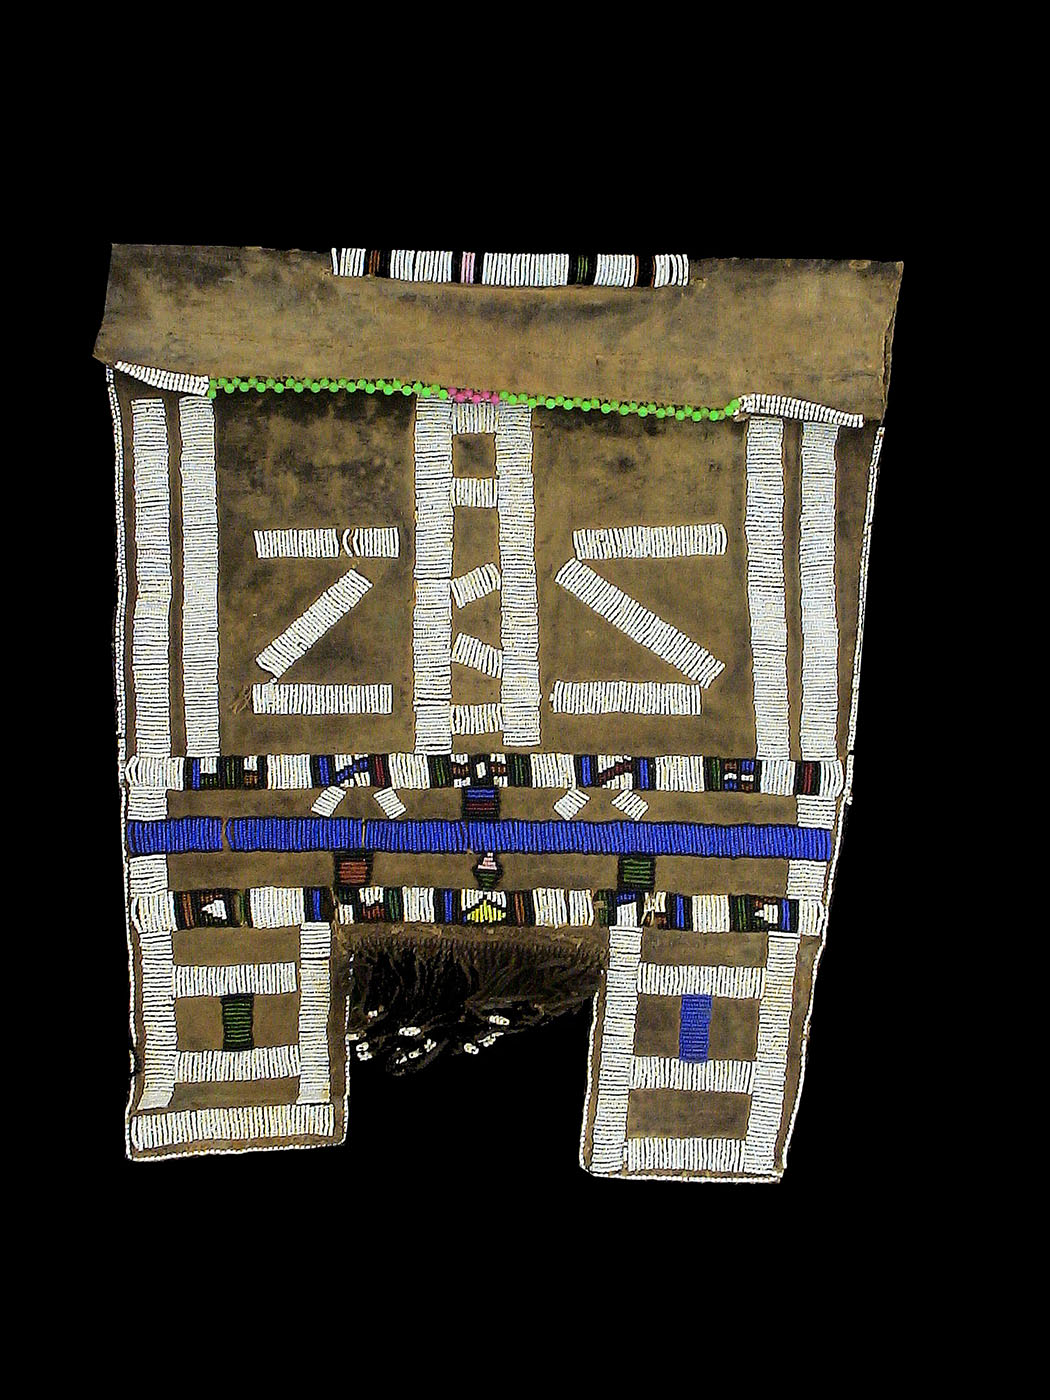  Mapoto Beaded Skirt - Ndebele People, South Africa -1468